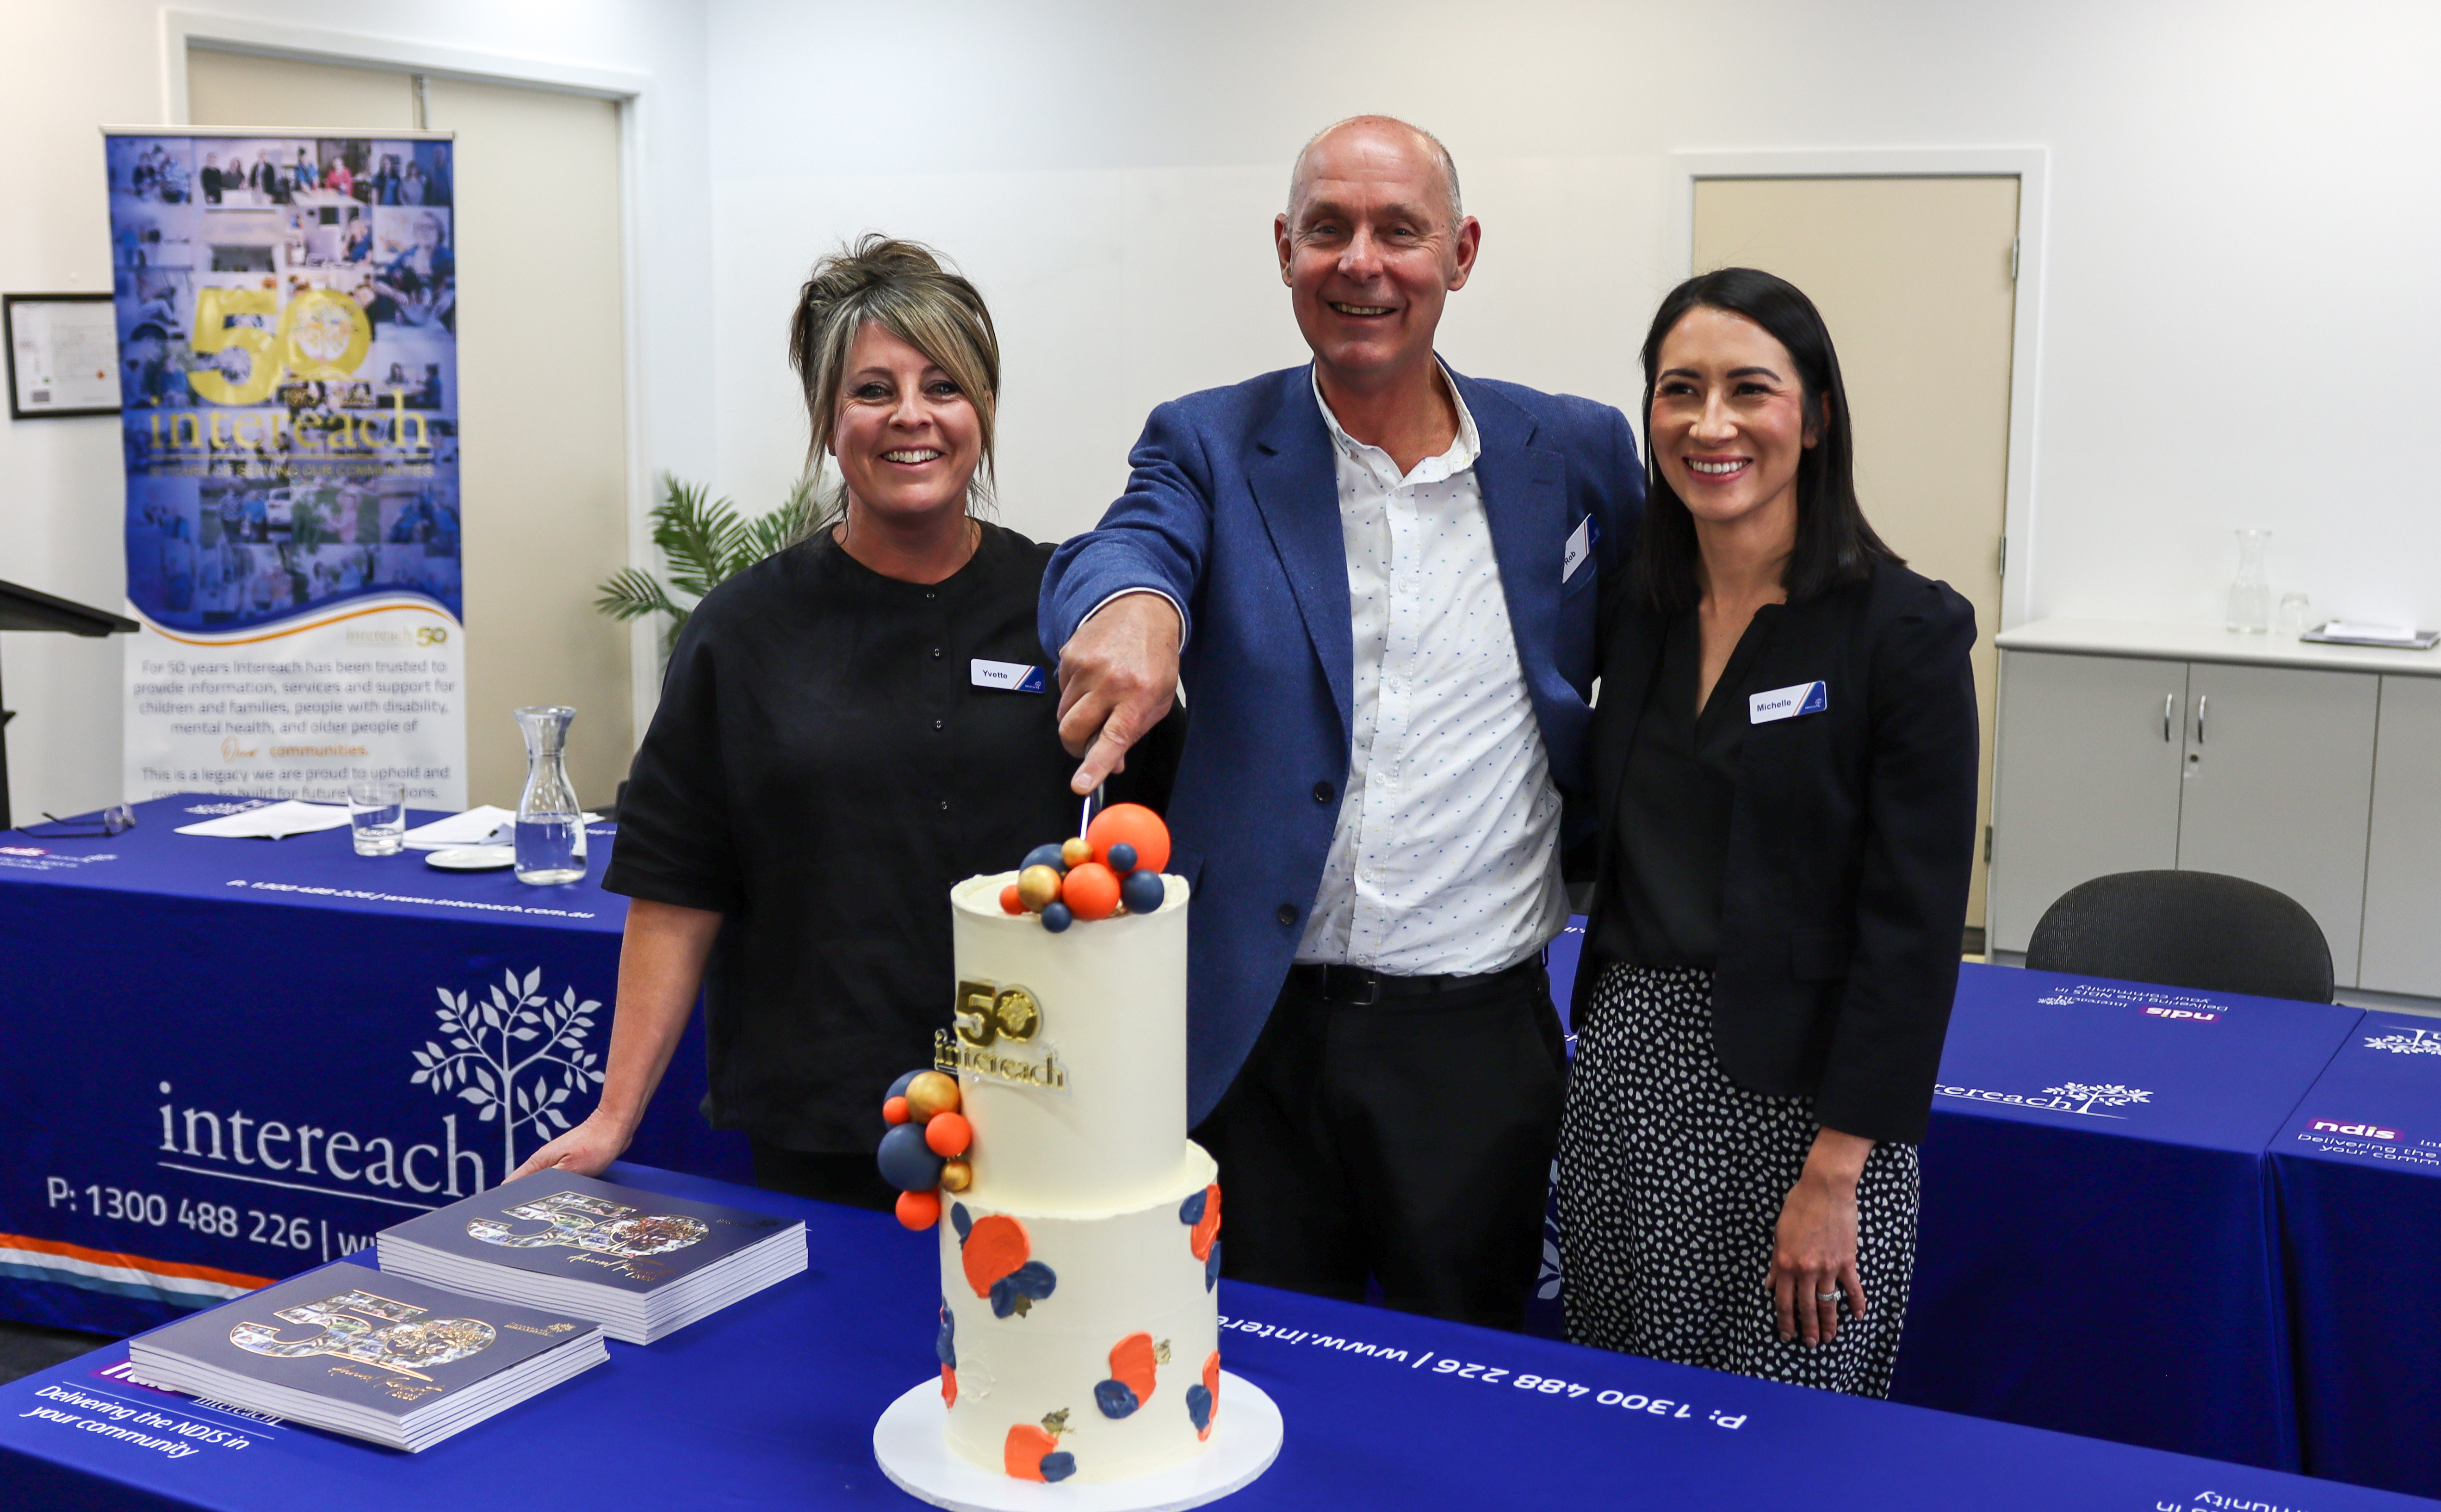 Two women dressed in black and a man in a suit standing in a board room behind a table smiling while cutting a two-tiered cake to celebrate Intereach's 50th anniversary